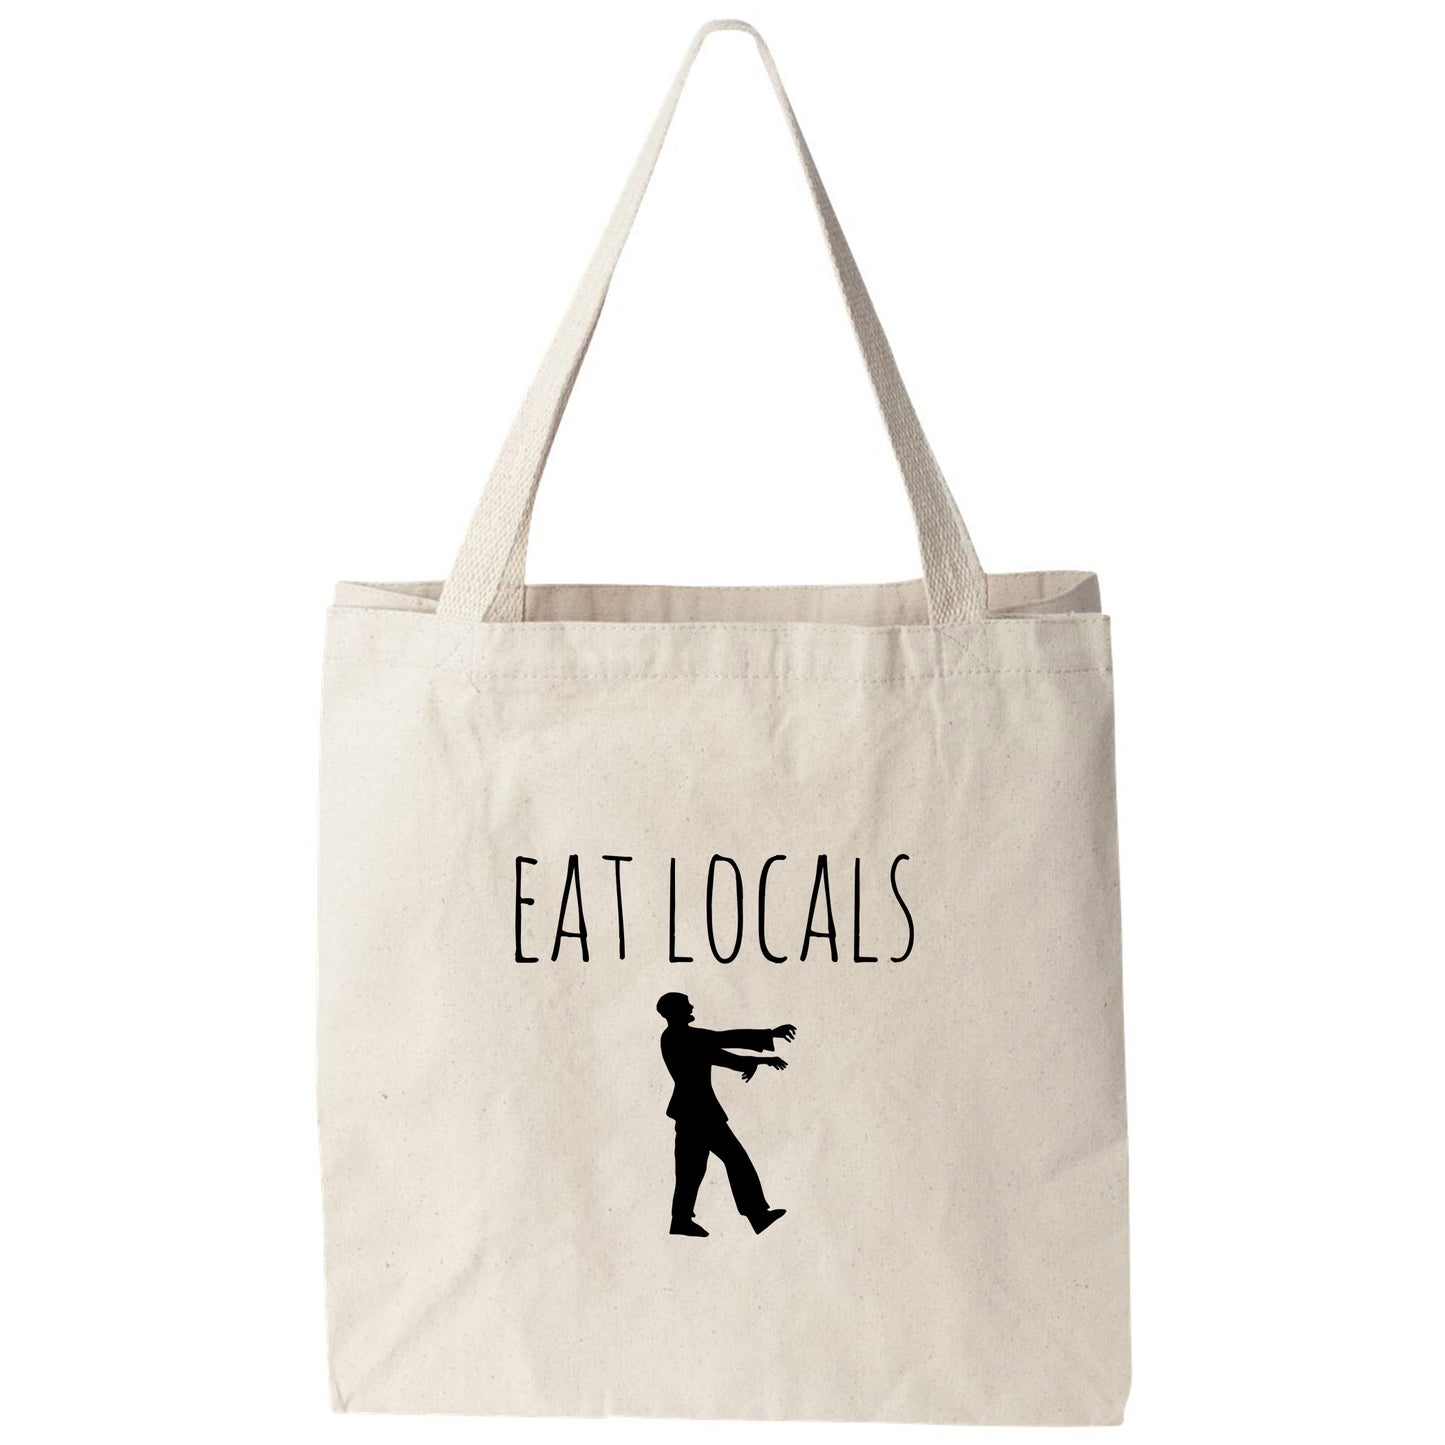 a tote bag with a silhouette of a man holding a gun